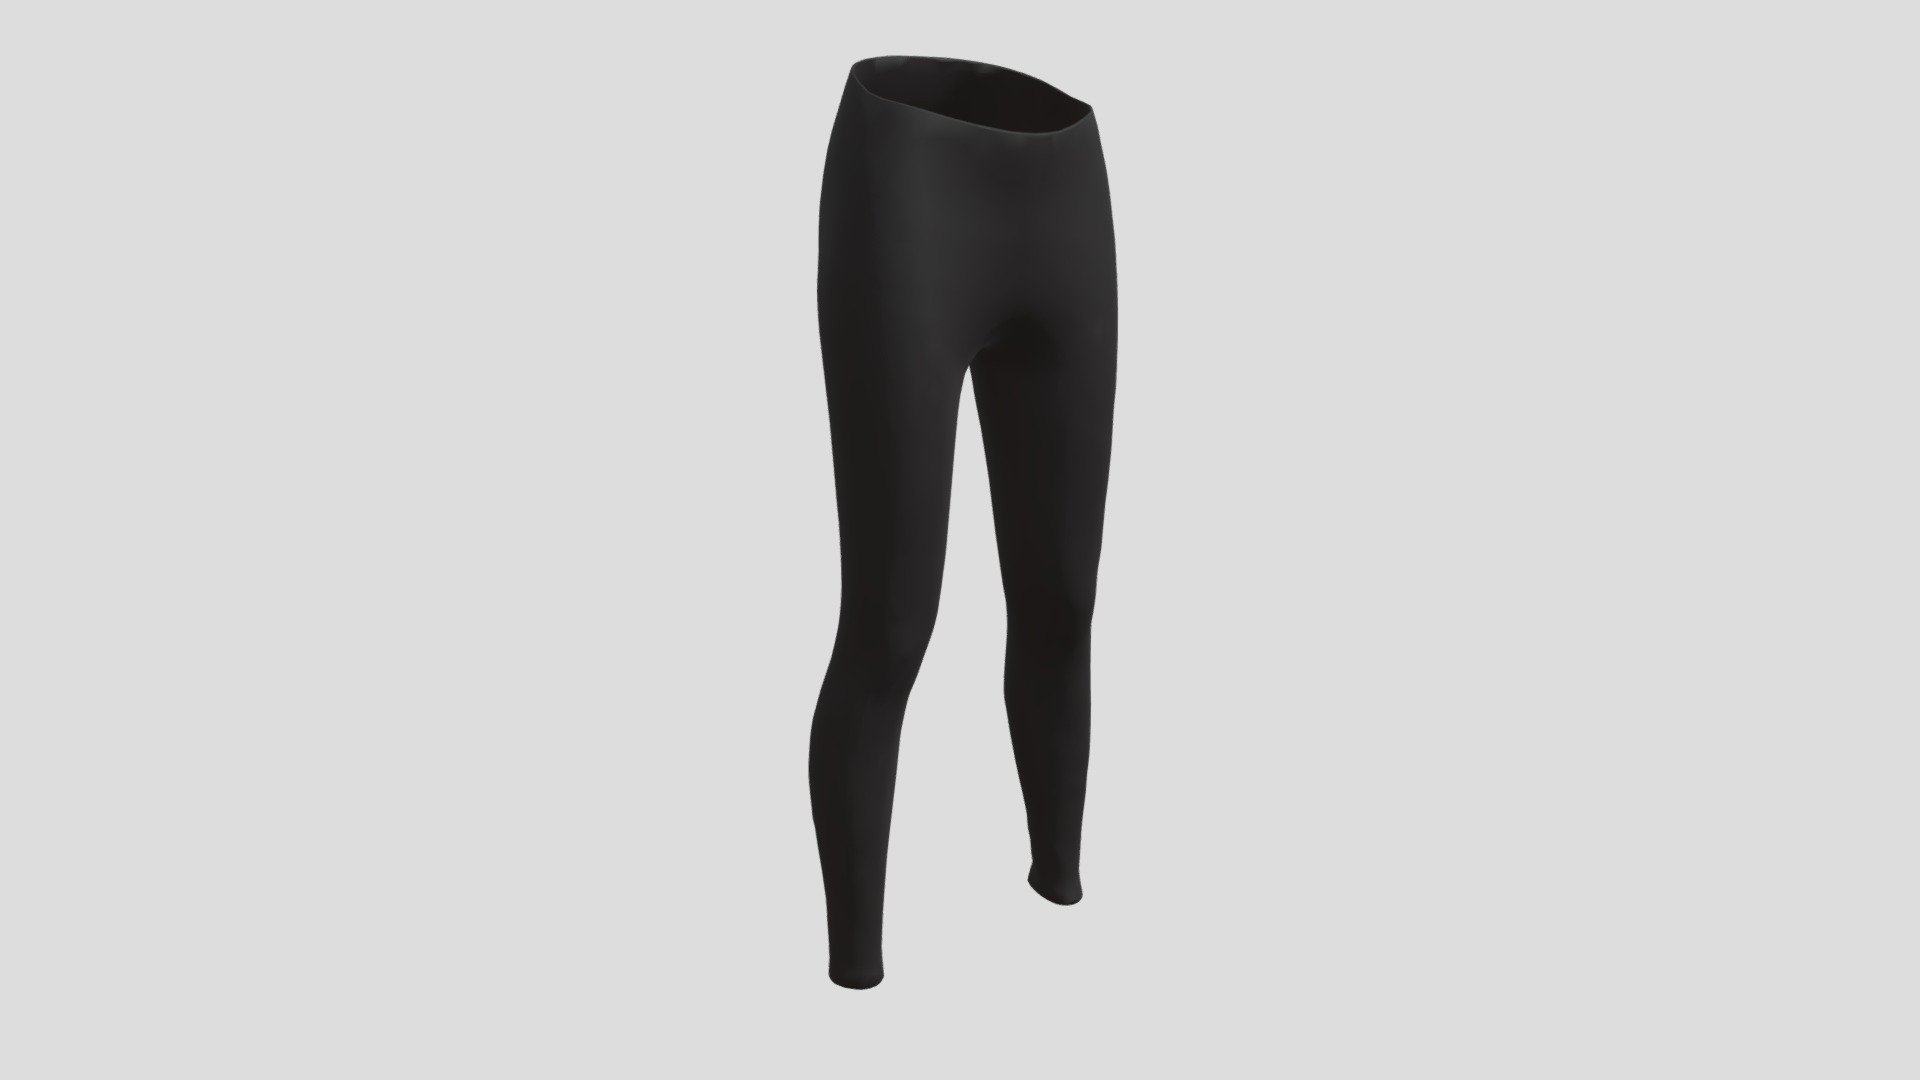 Custom Yoga Tights 3D Model Perfect for companies that want to present mockups professionally or use for our 3D Kit builder application. Contact us if you have any custom 3D model request for apparel.

Find out more: Custom Uniform Builder - Custom Yoga Tights | Sublimated Tights 3D Model - 3D model by Uniform Builder (@uniformbuilder) 3d model